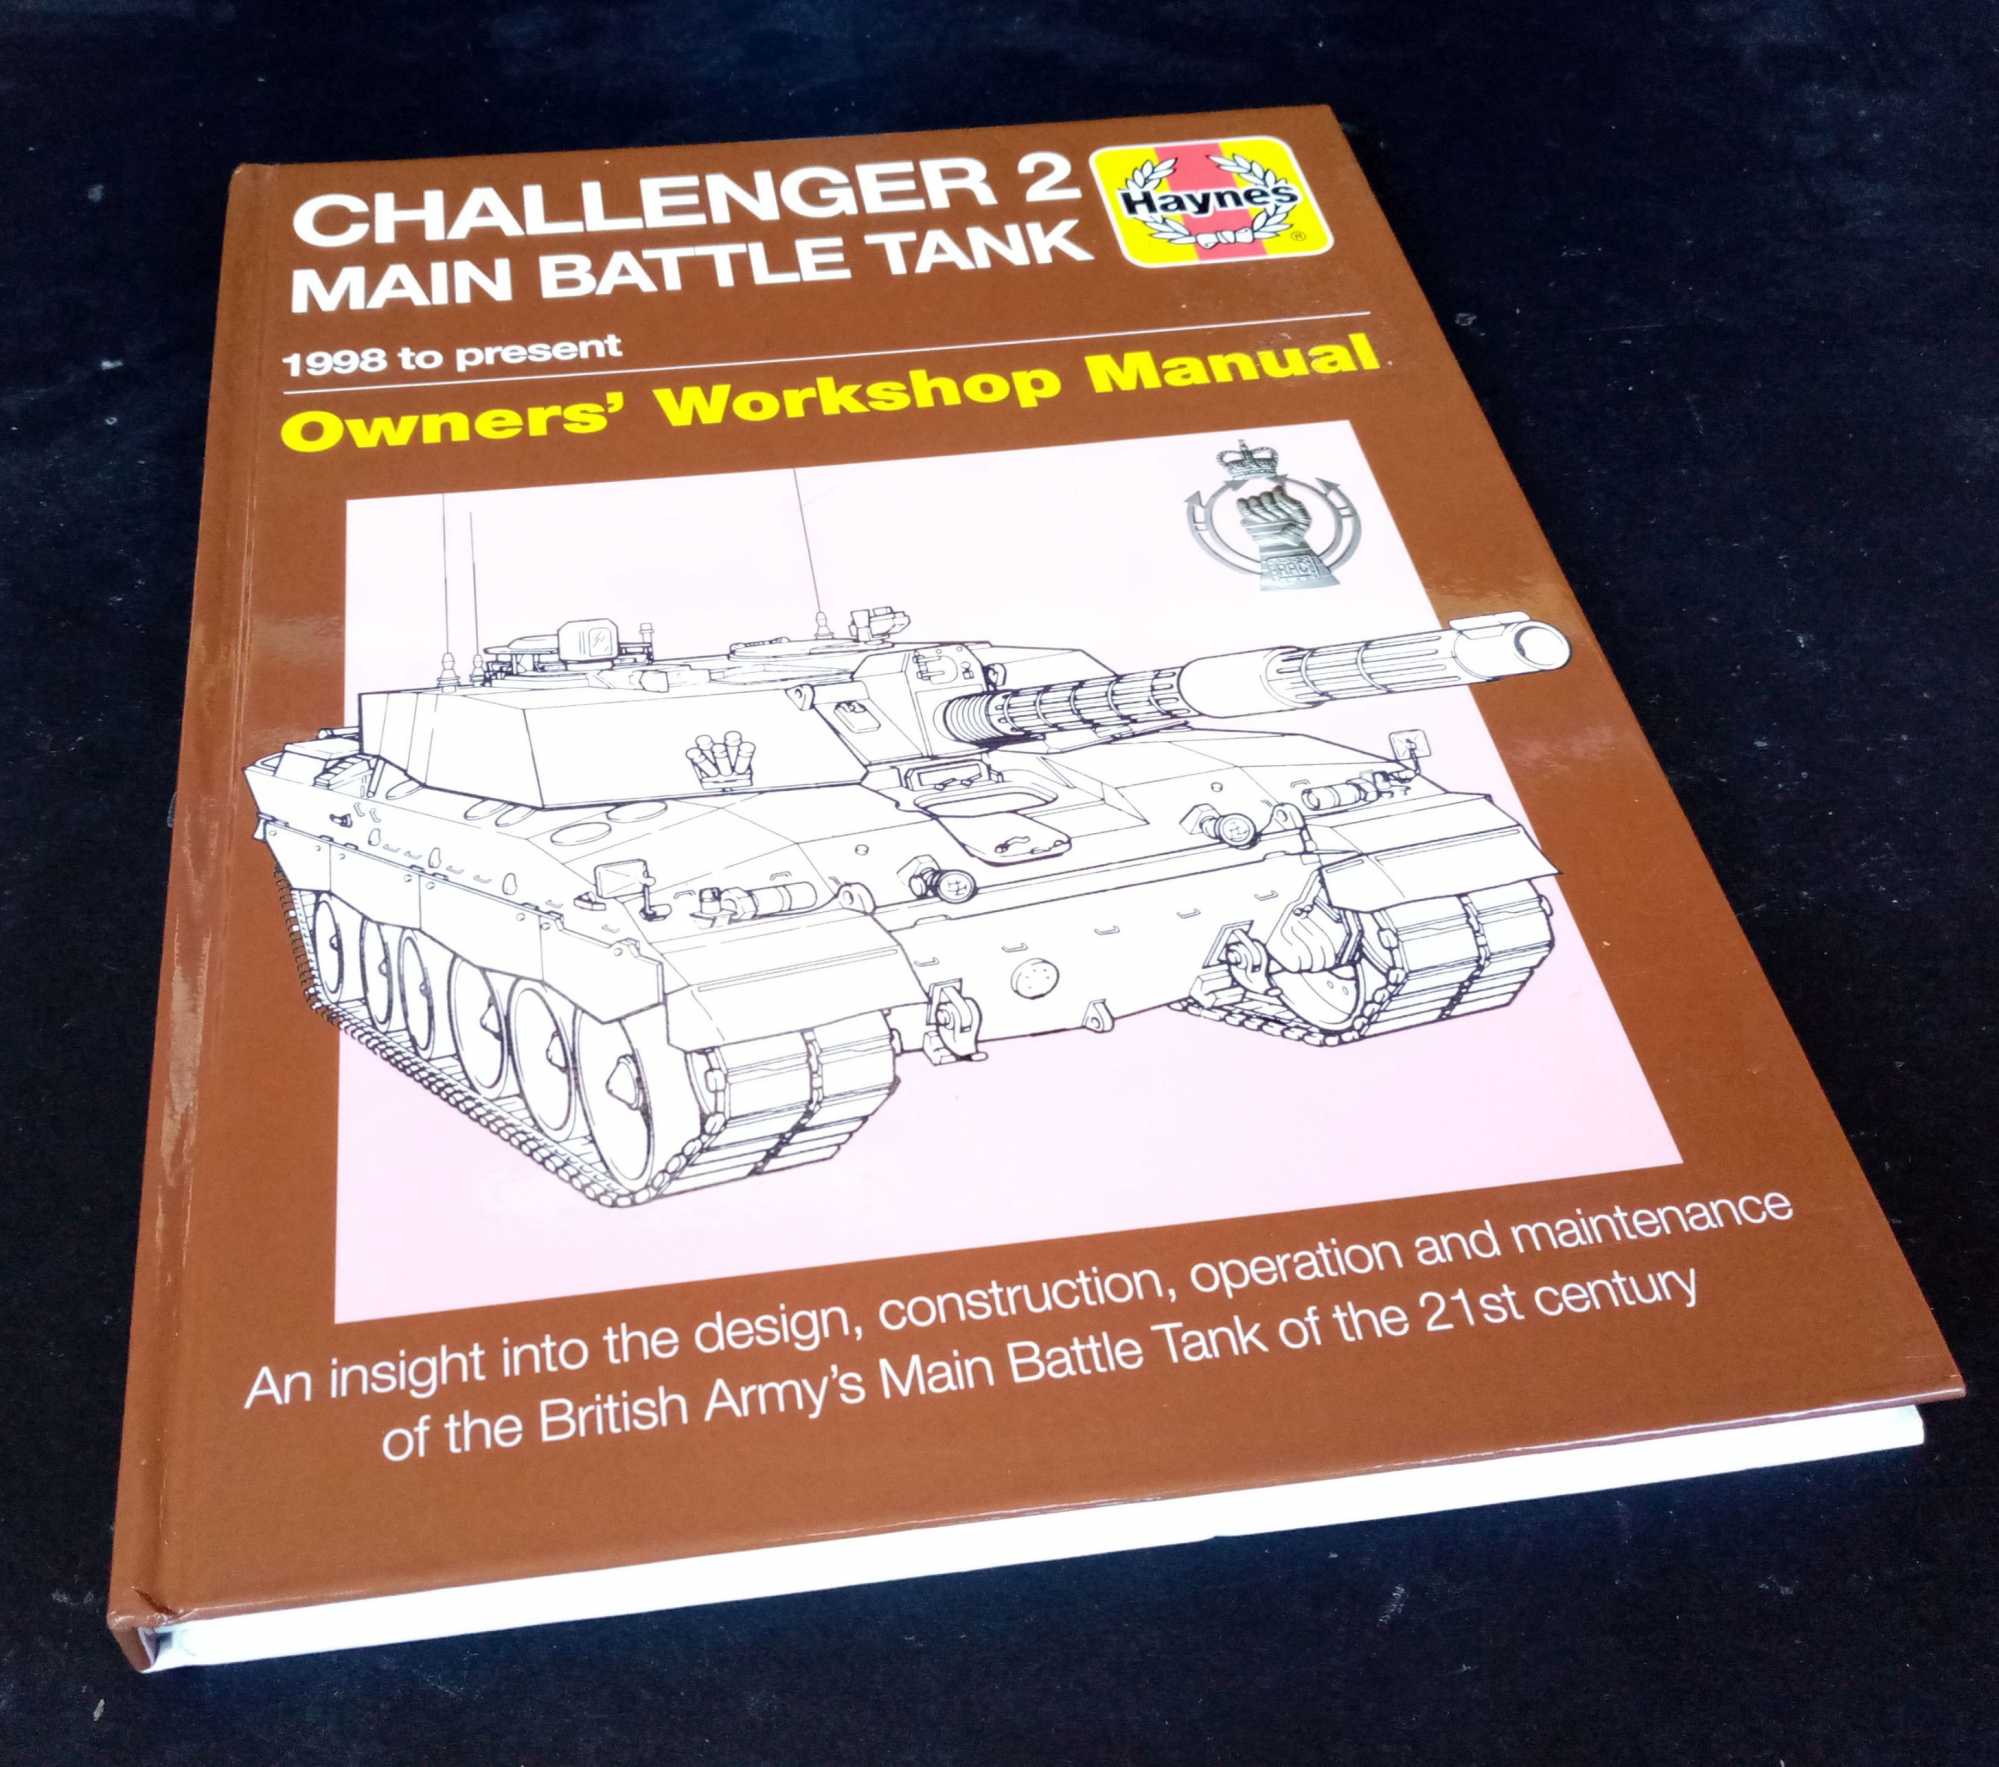 Dick Taylor - Challenger 2 Main Battle Tank 1988 to present [2018]. Owner's Workshop Manual